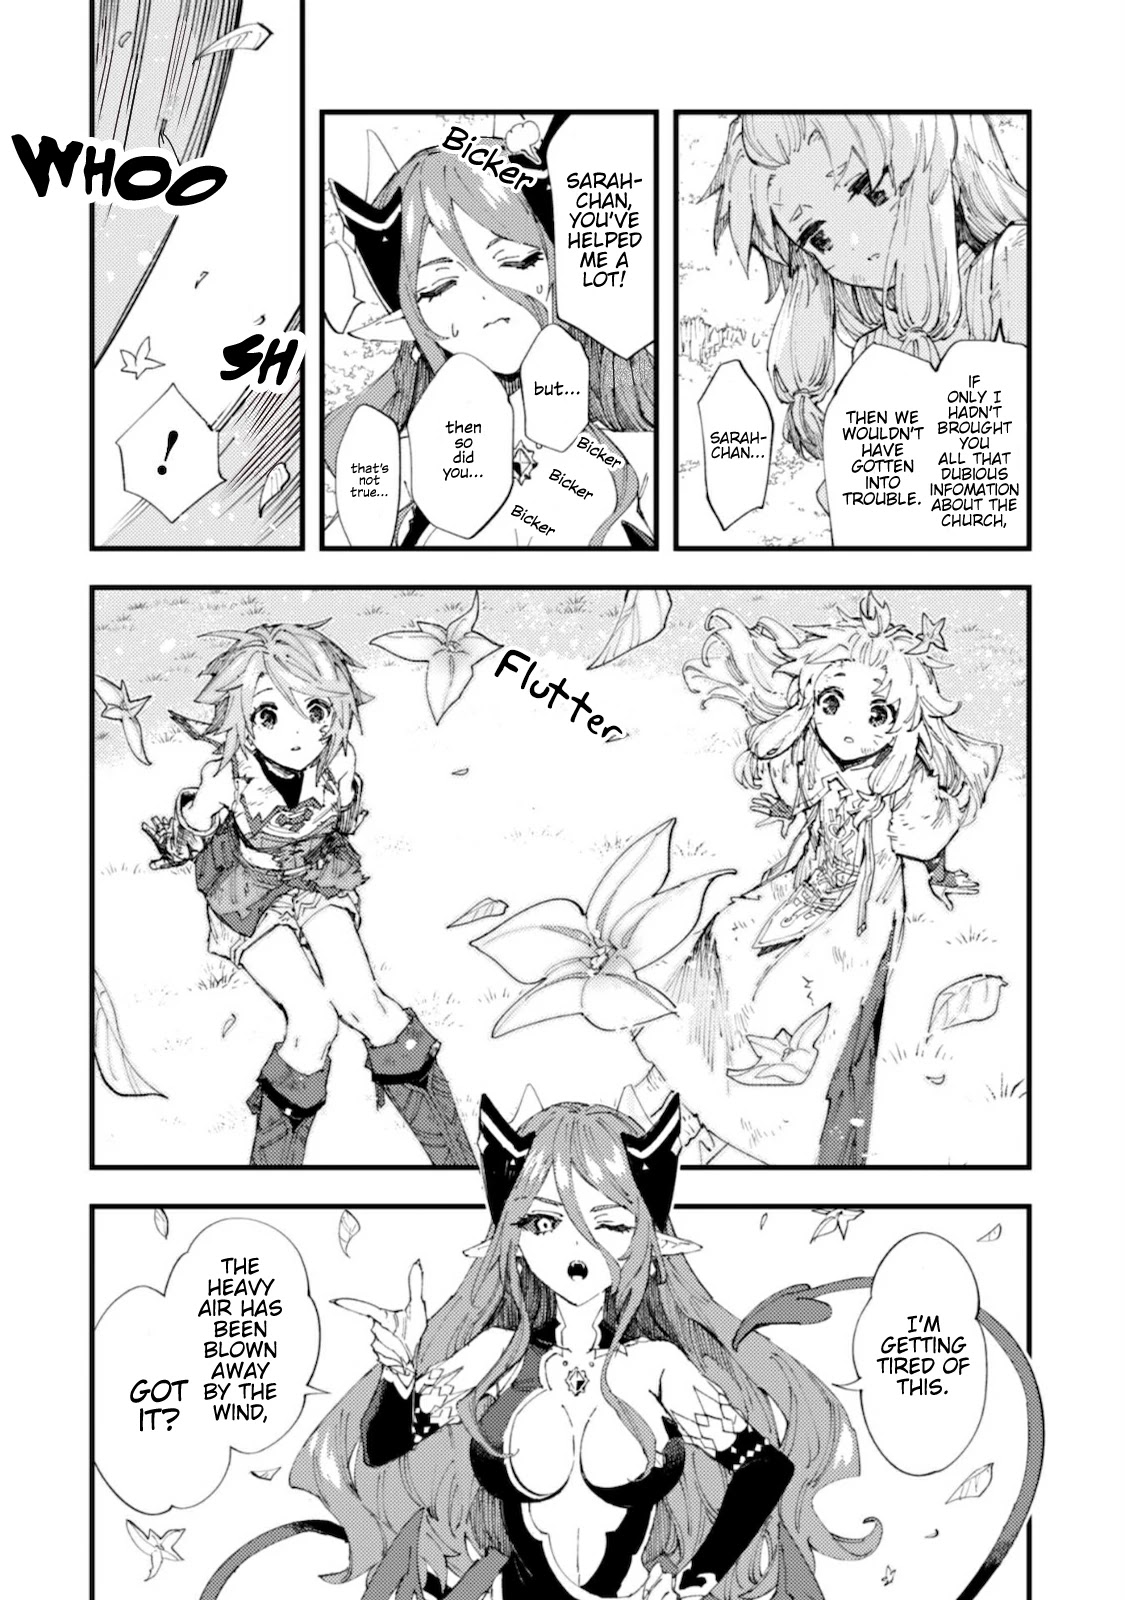 Do You Think Someone Like You Could Defeat The Demon Lord? - Page 3